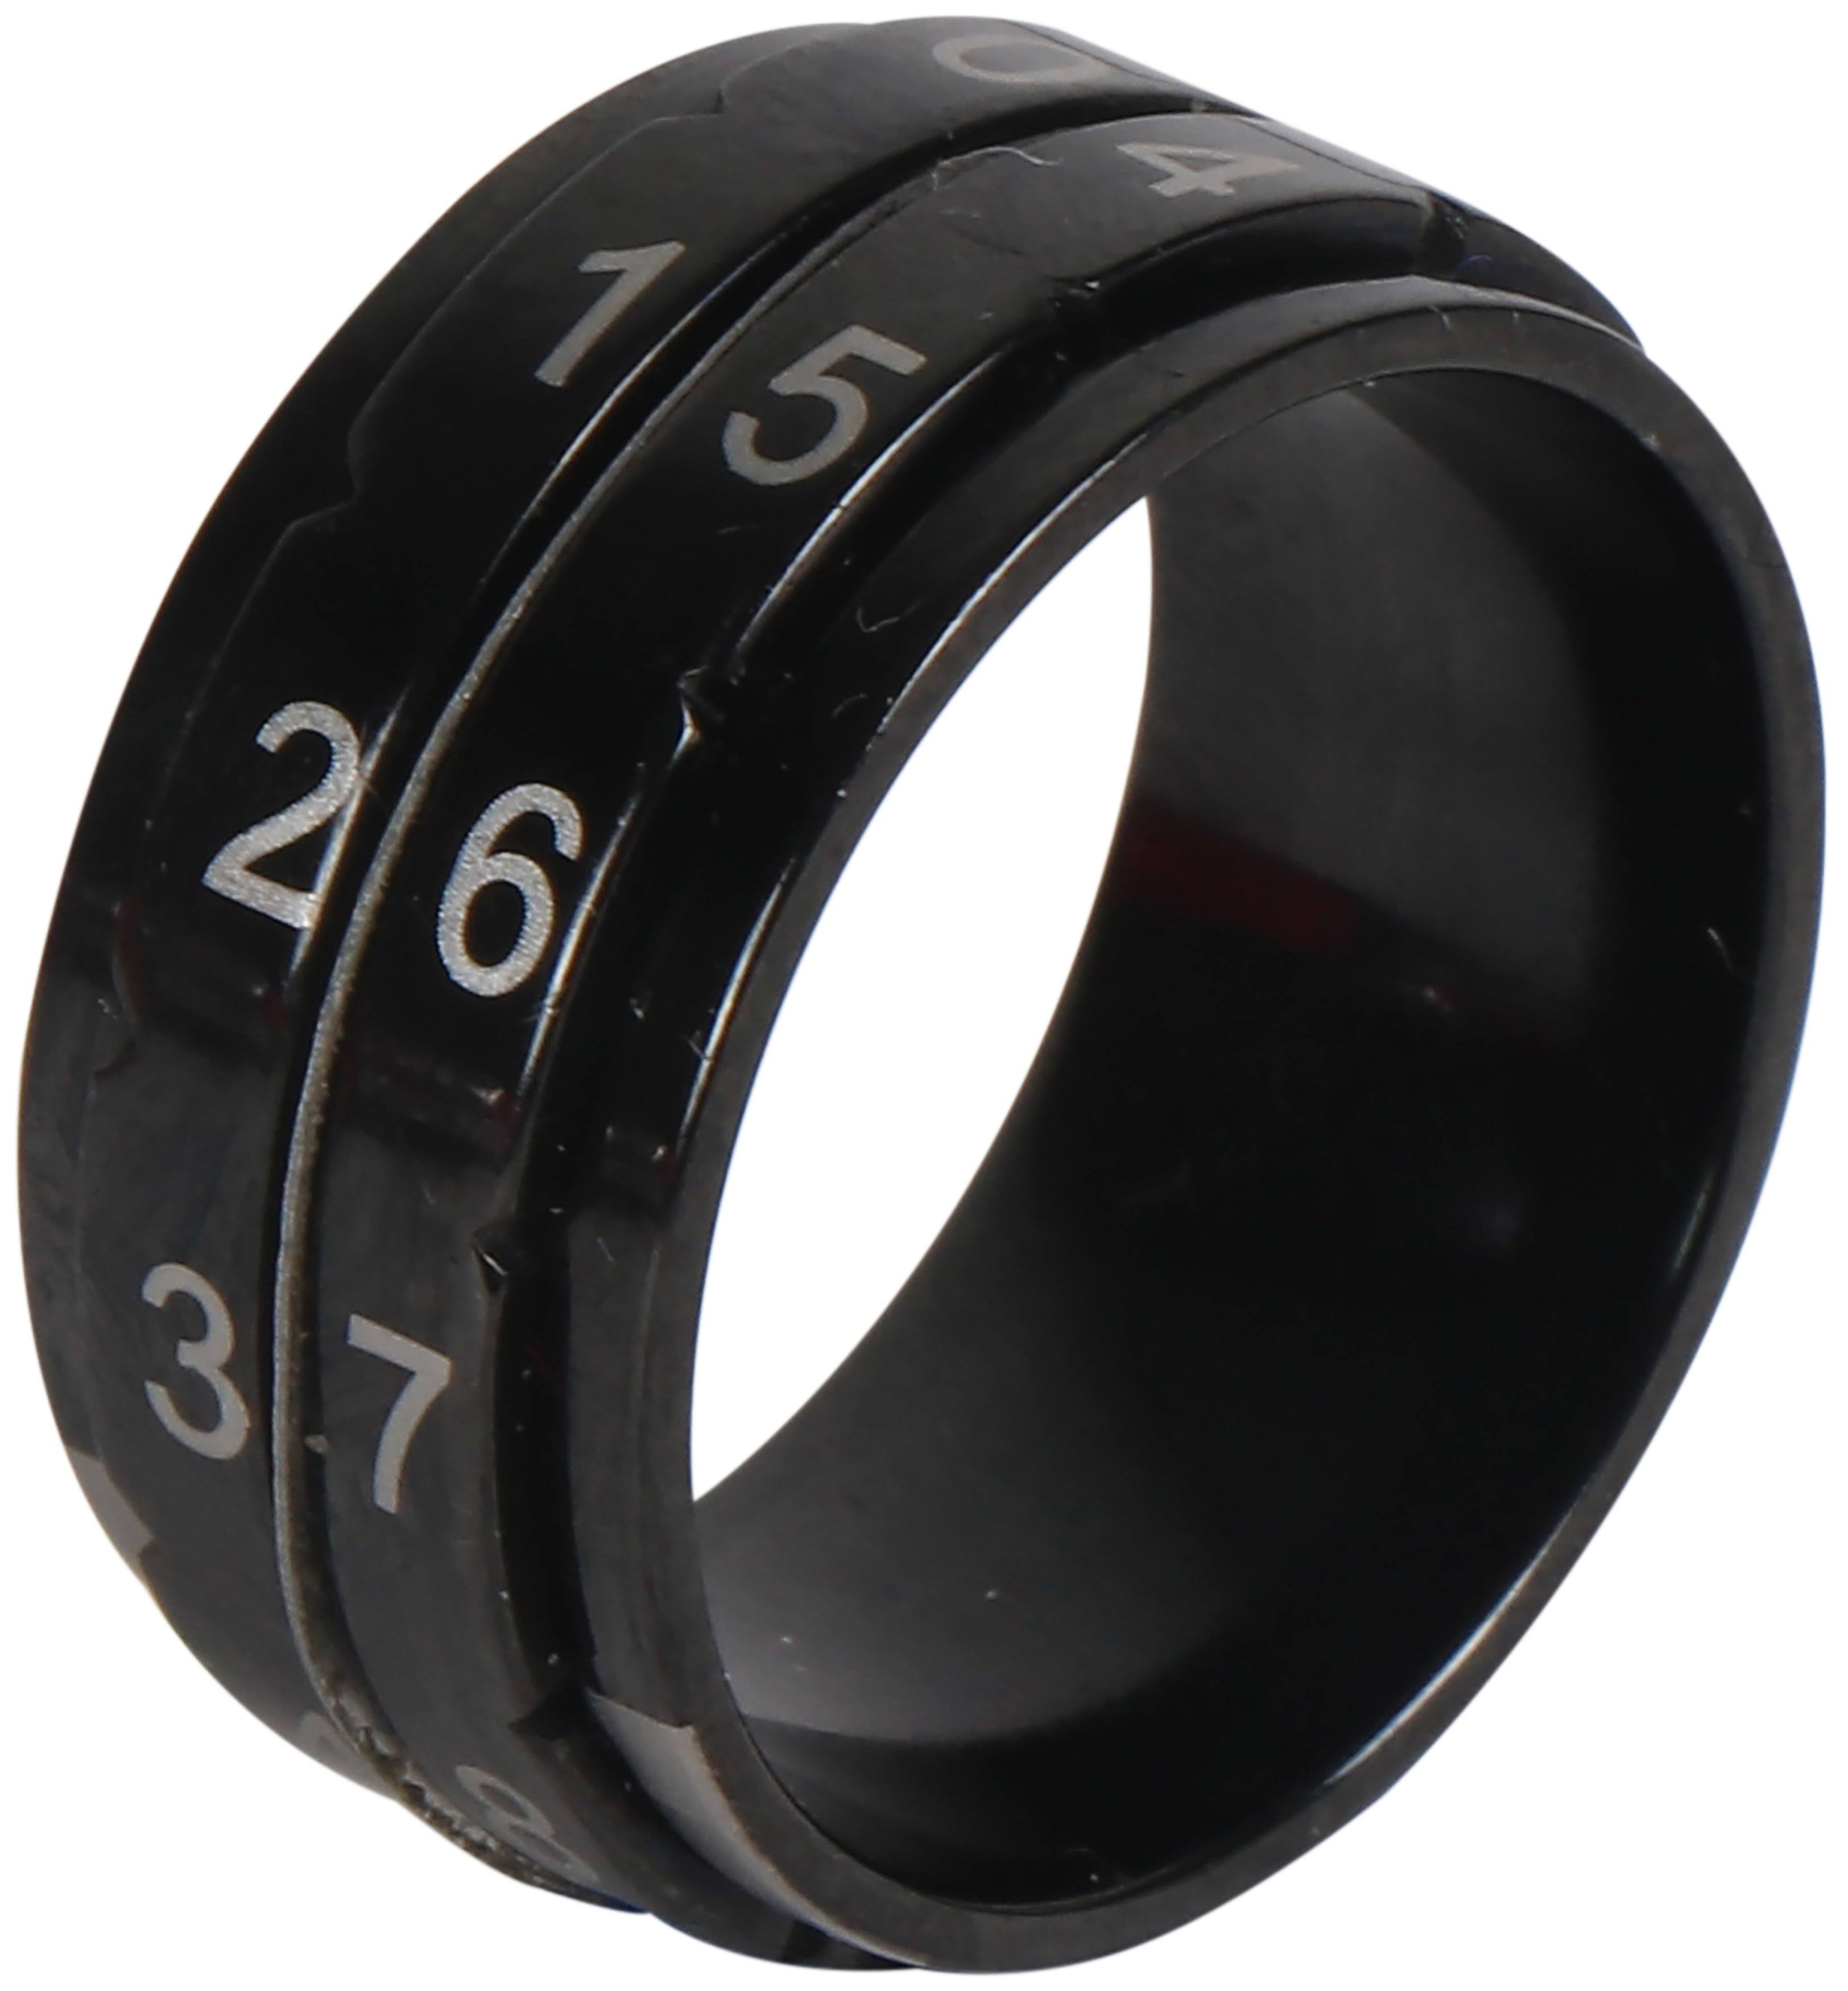 Knitter's Pride Row Counter Ring Size 10 19.8mm Diameter